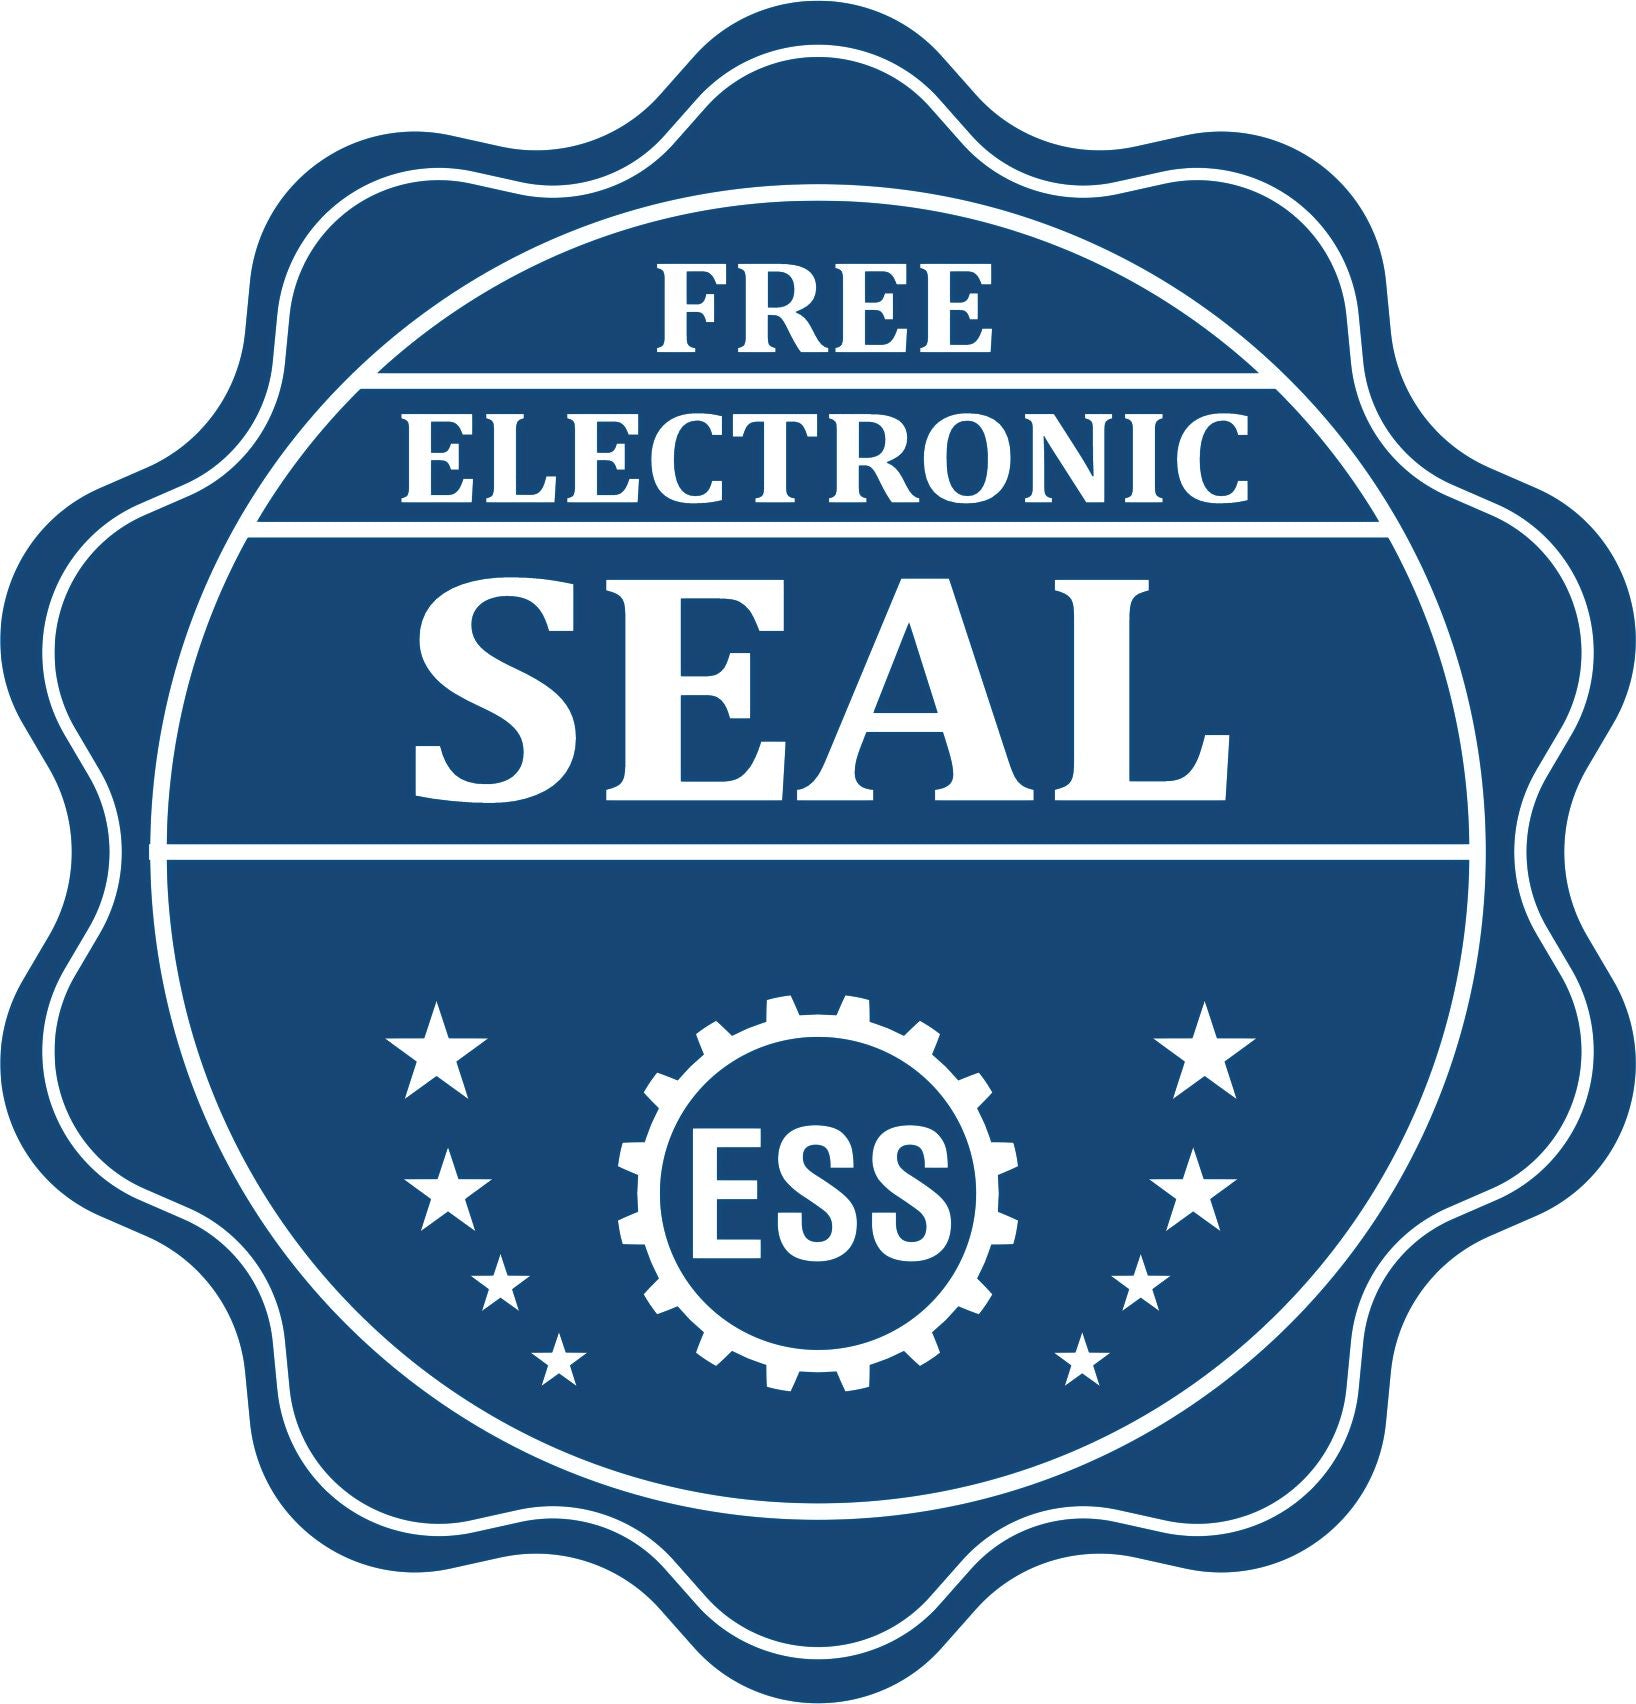 A badge showing a free electronic seal for the Premium MaxLight Pre-Inked Kansas Engineering Stamp with stars and the ESS gear on the emblem.